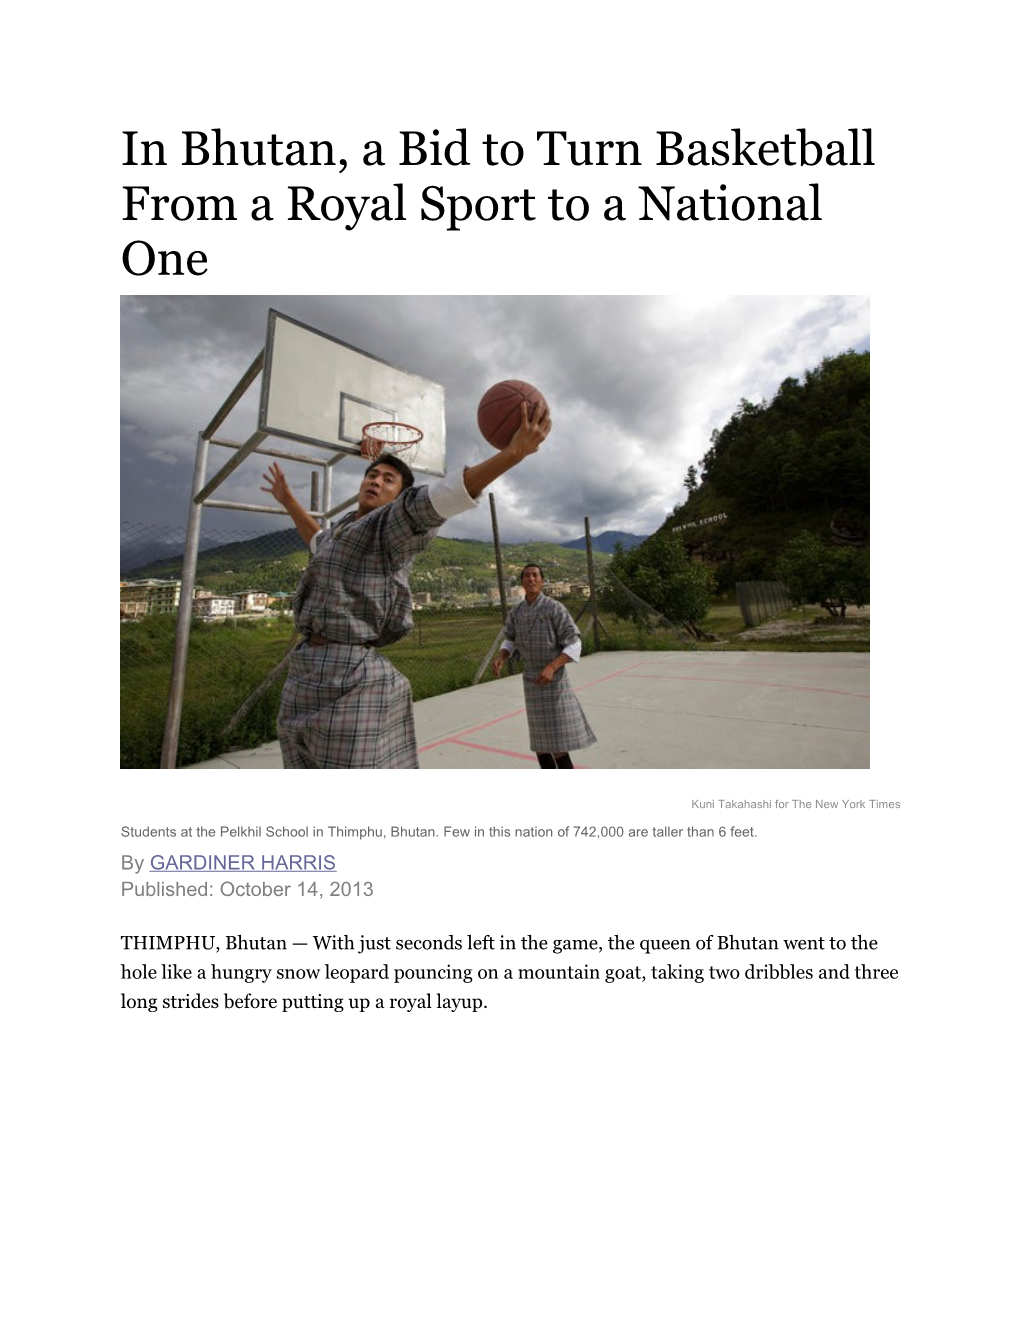 In Bhutan, a Bid to Turn Basketball from a Royal Sport to a National One